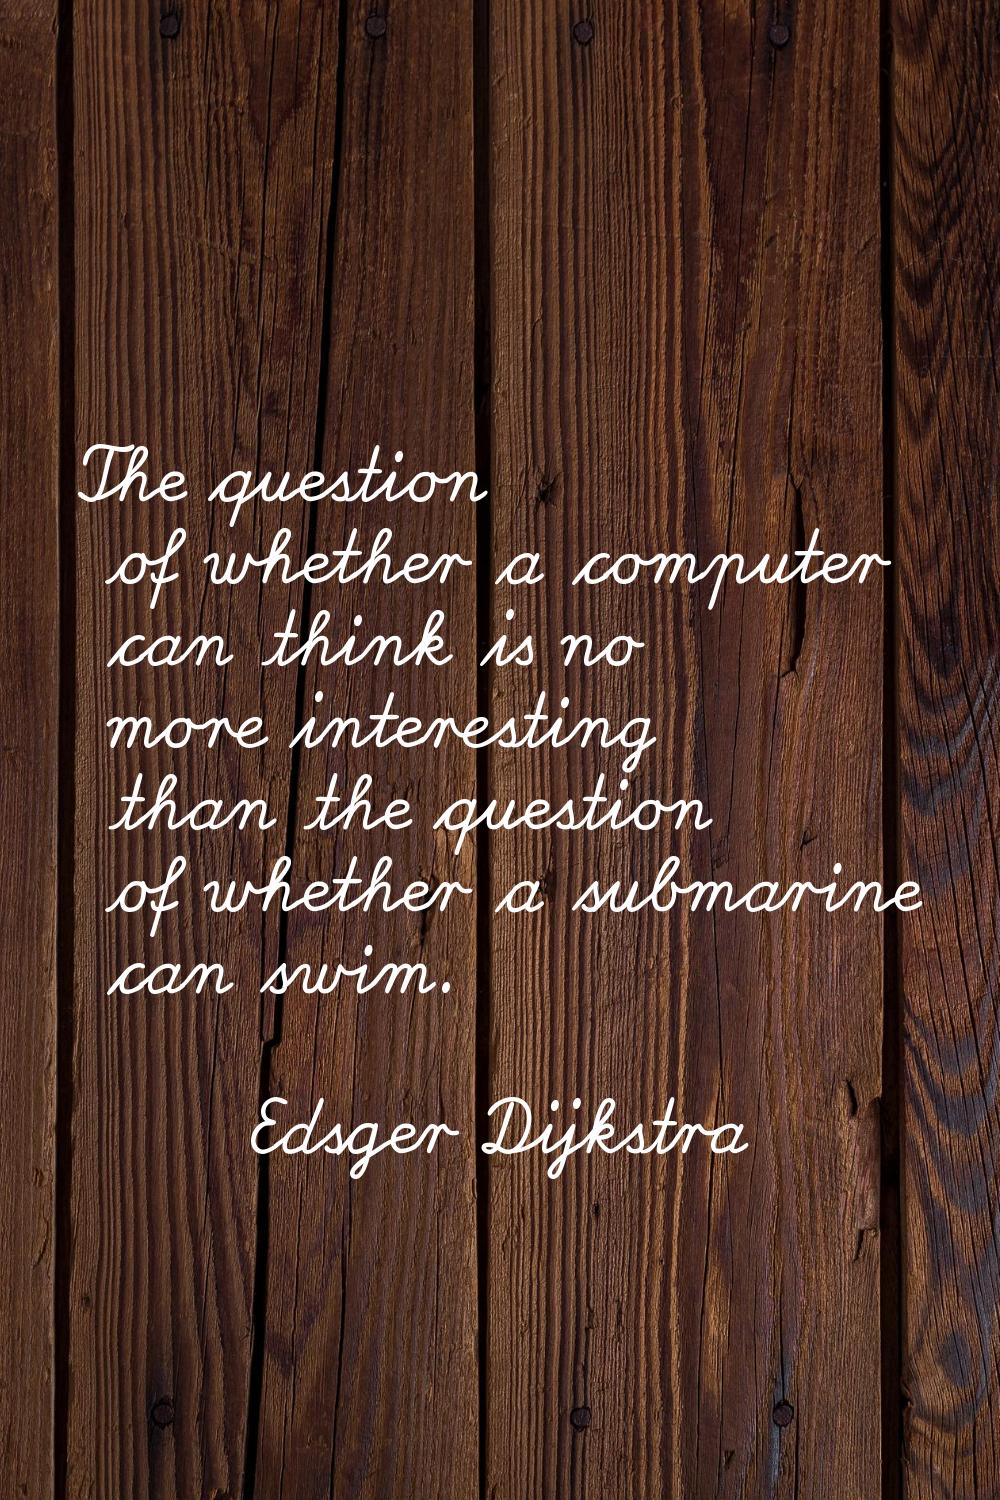 The question of whether a computer can think is no more interesting than the question of whether a 